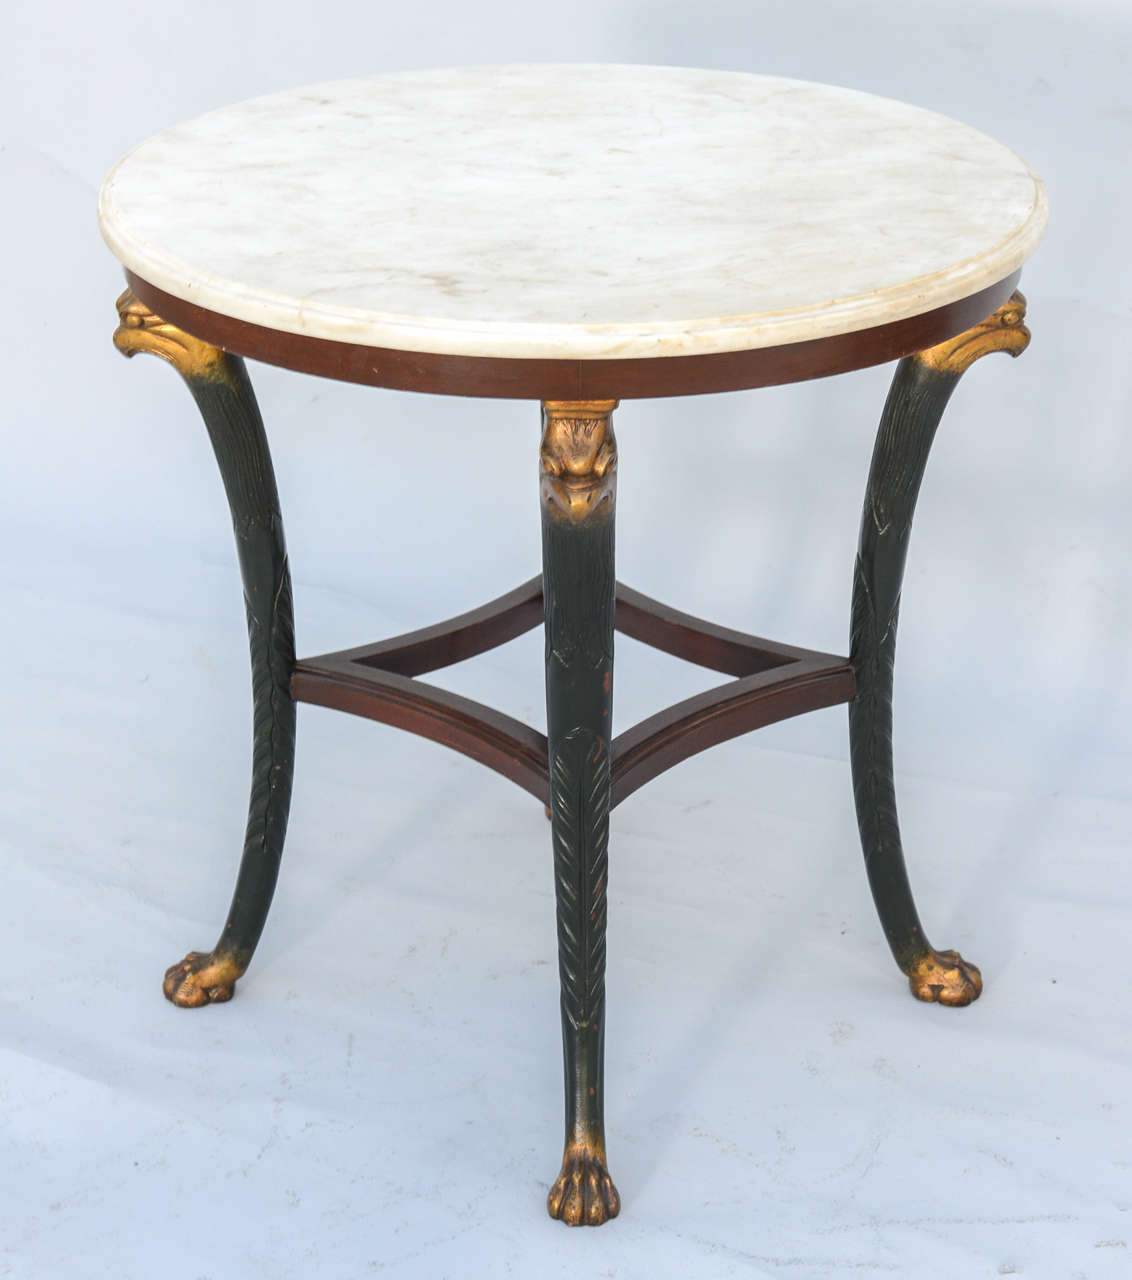 Round table, in Regency taste, having white veined marble top, raised on wood base, painted and parcel gilt; a carved eagle head atop each splayed leg, terminating in paw feet.

Stock ID: D6509